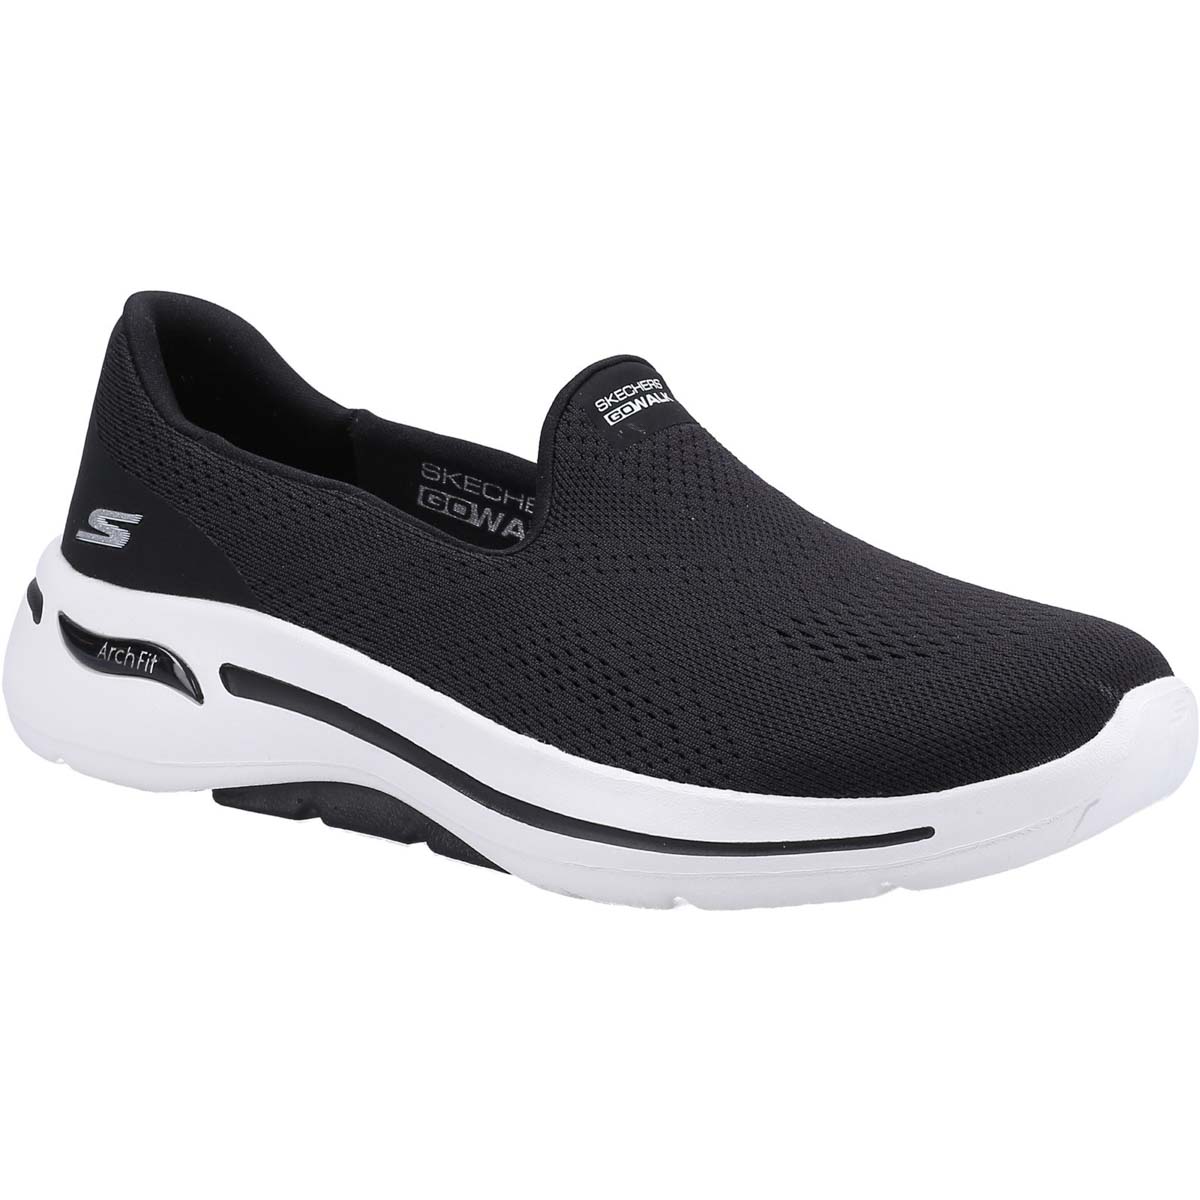 Skechers Go Walk Arch Fit Imagined Black Womens Trainers 124483 In Size 6 In Plain Black